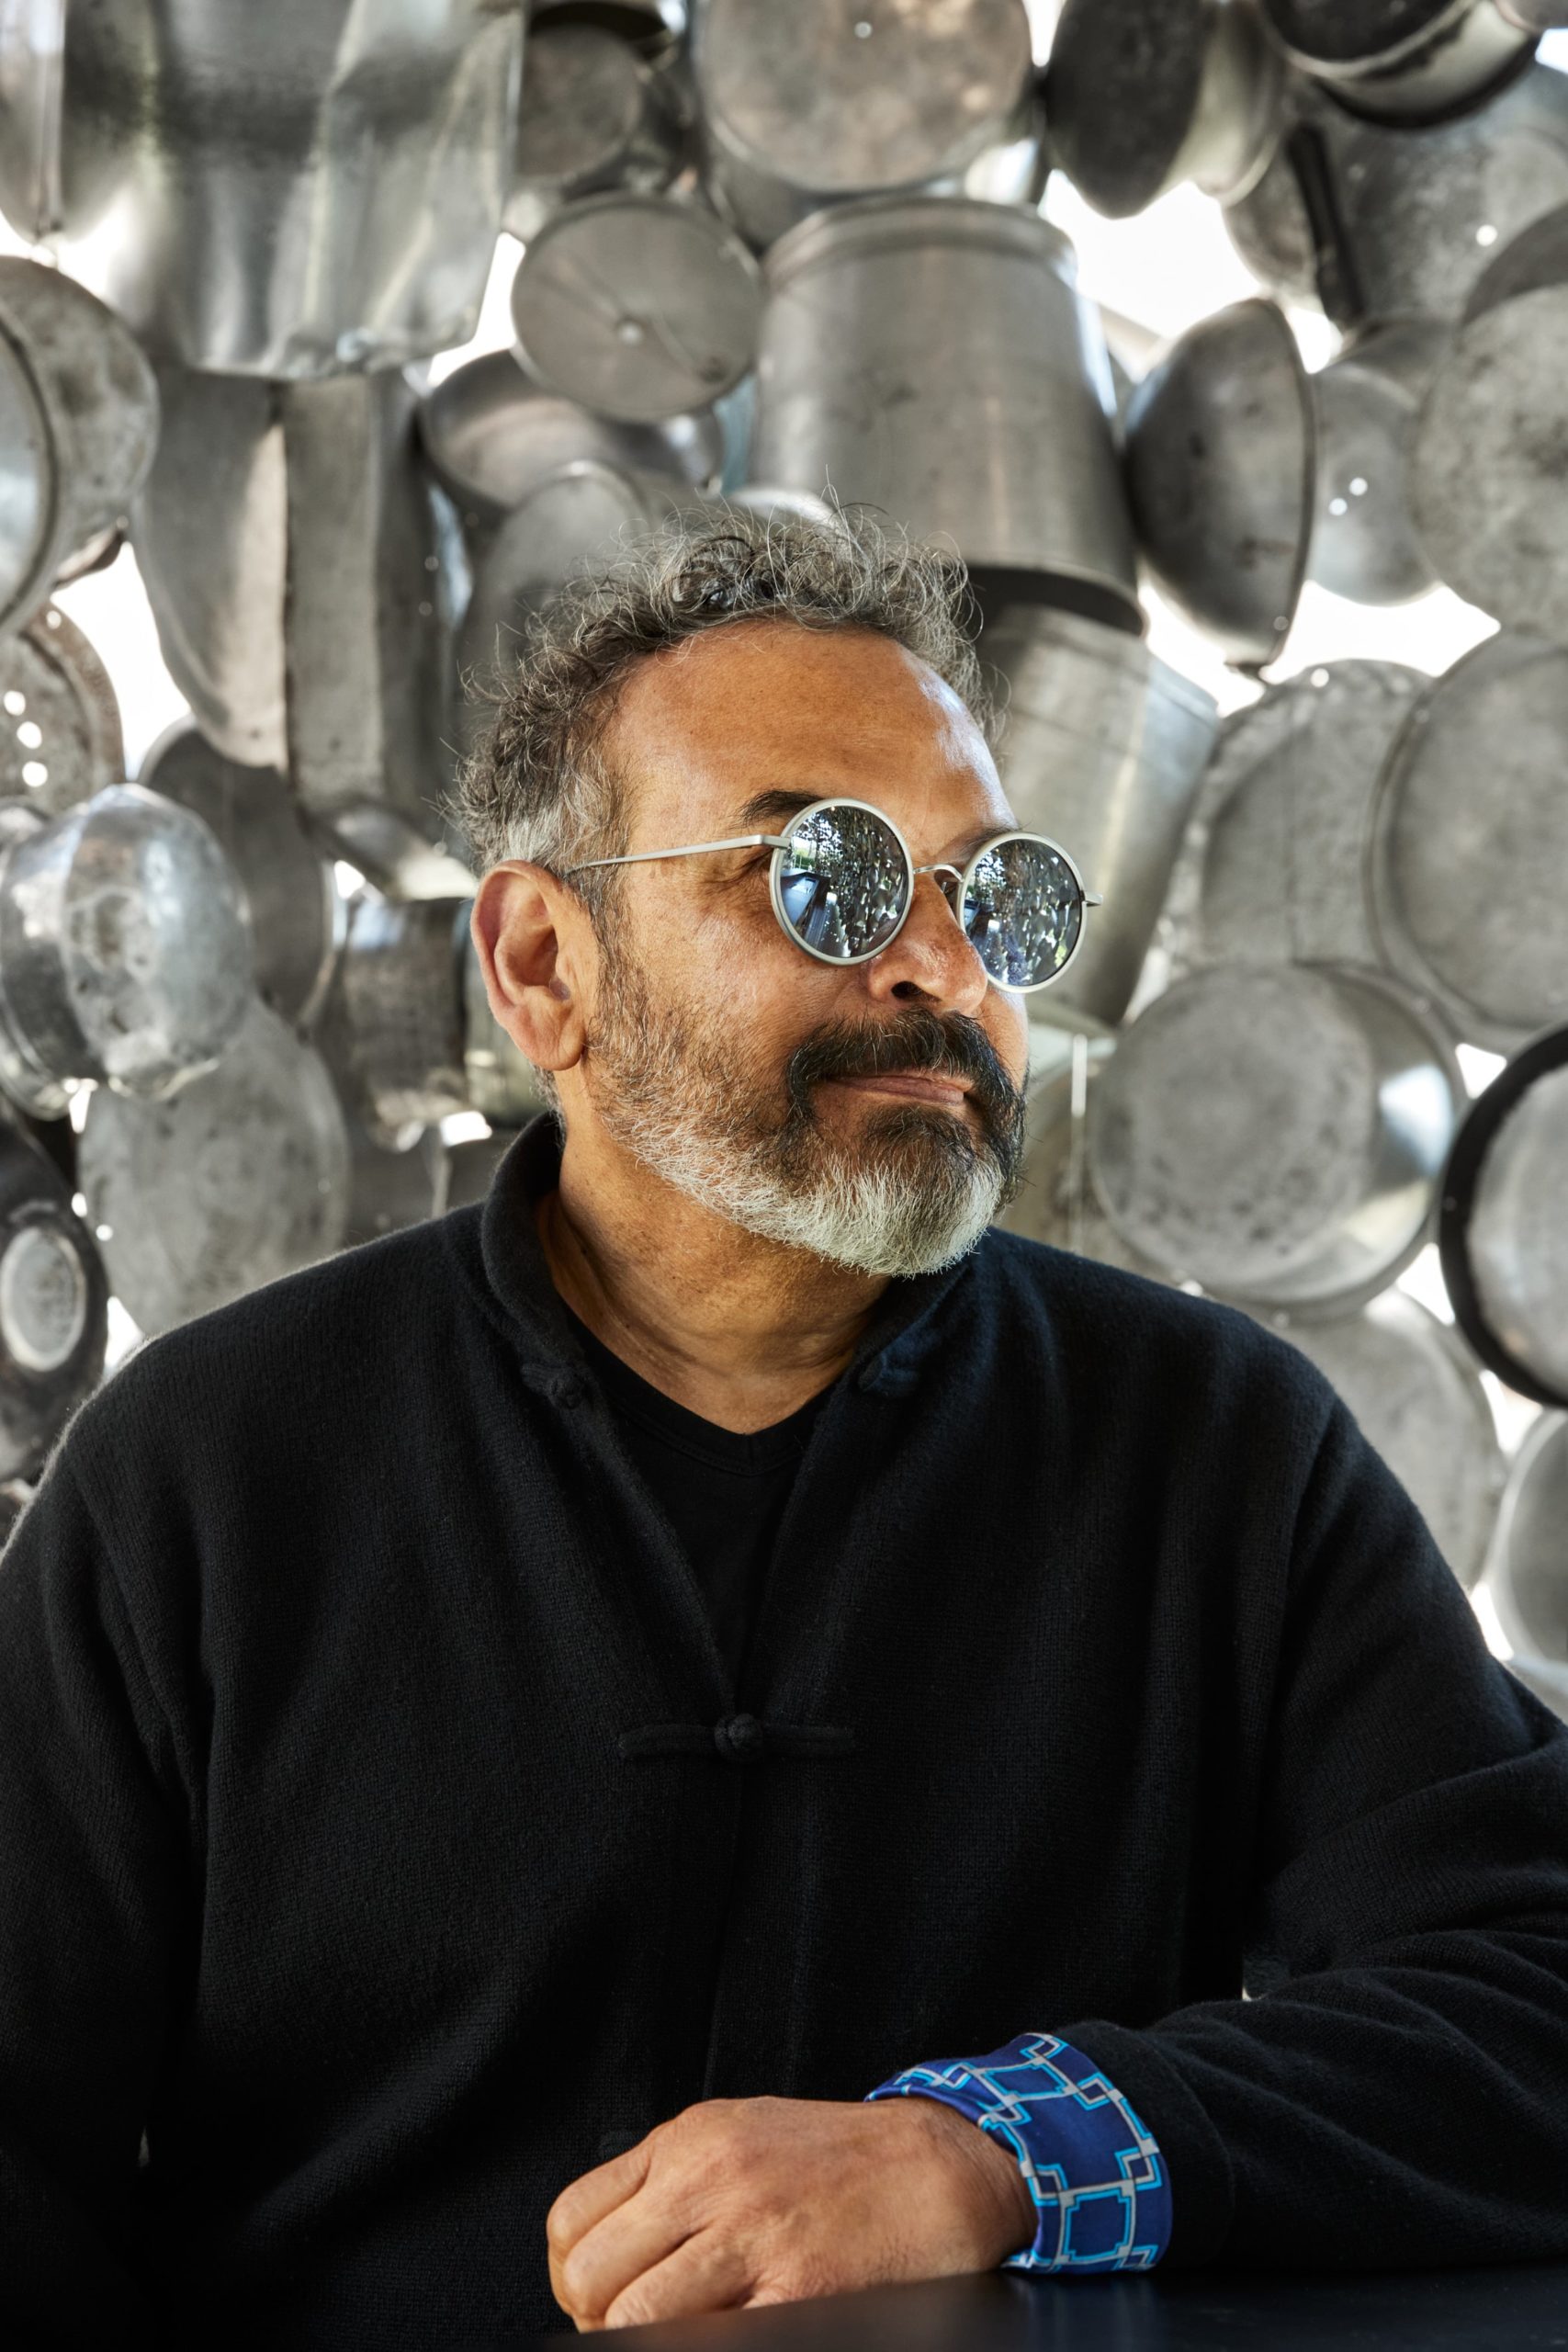 “Cooking the World” by Subodh Gupta